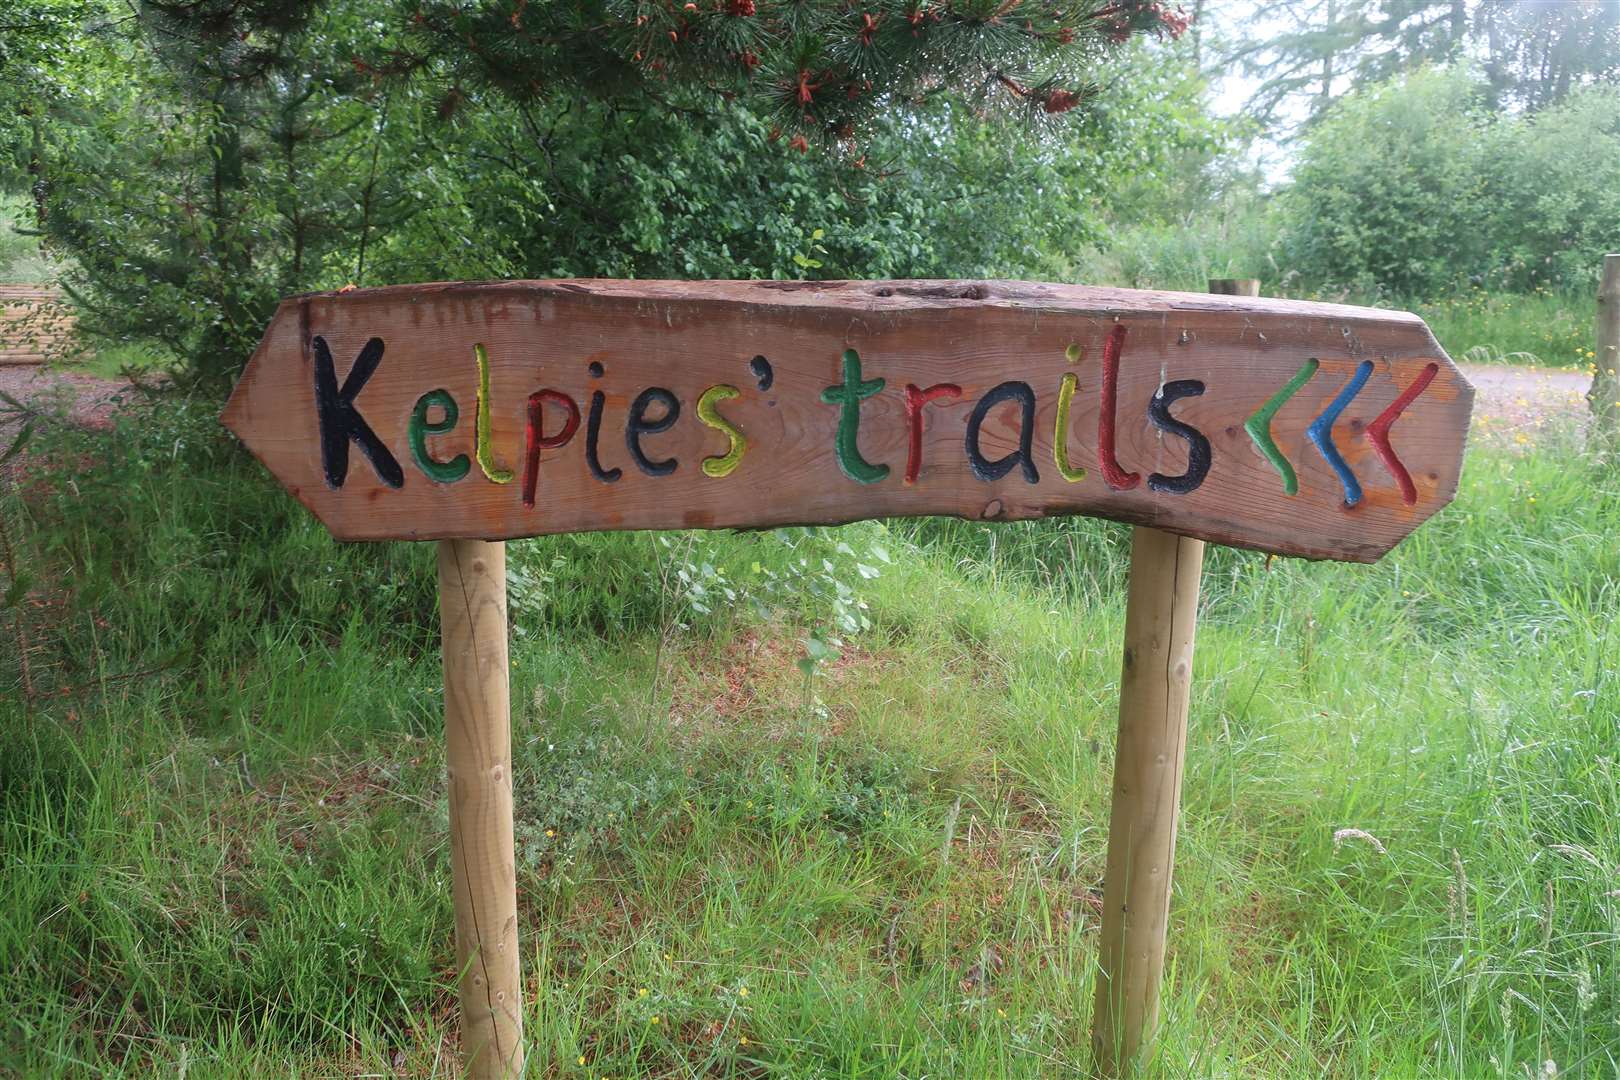 The Kelpies' Trails sign.